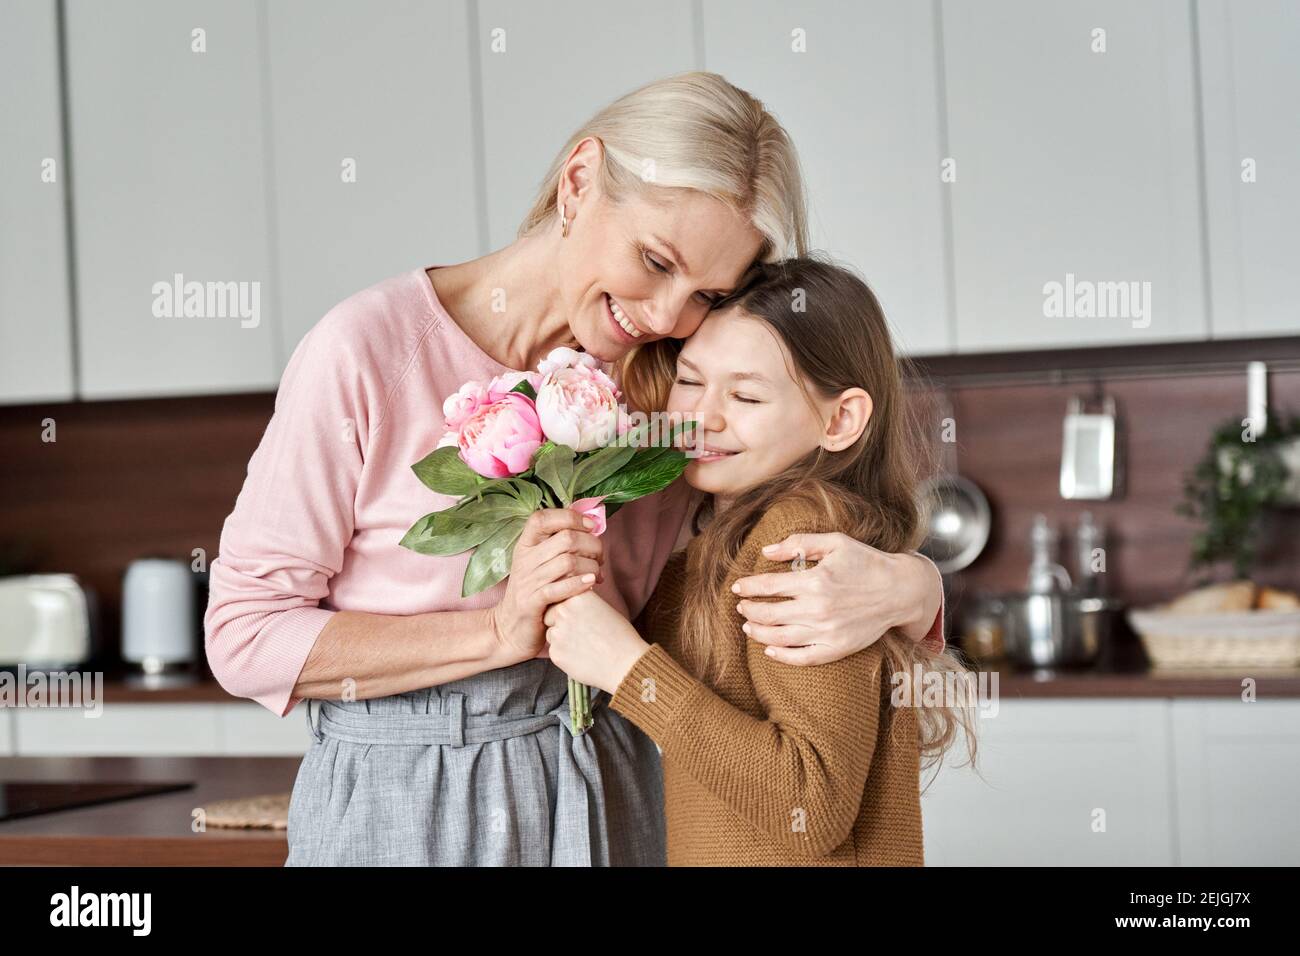 Happy mom receiving flowers from teen child daughter on Mothers Day. Stock Photo